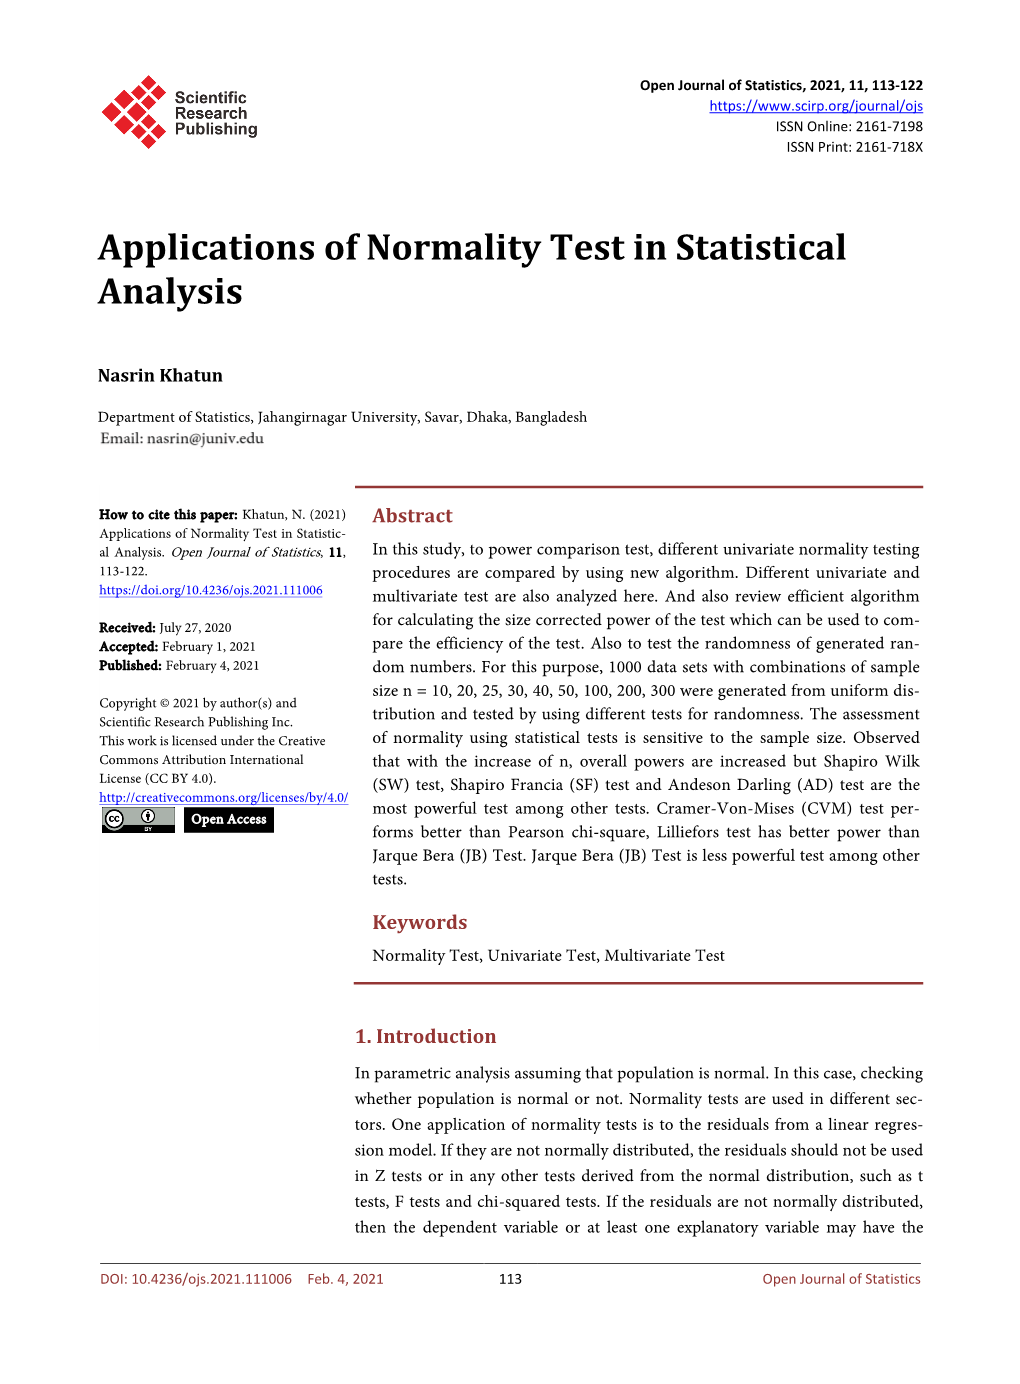 Applications of Normality Test in Statistical Analysis